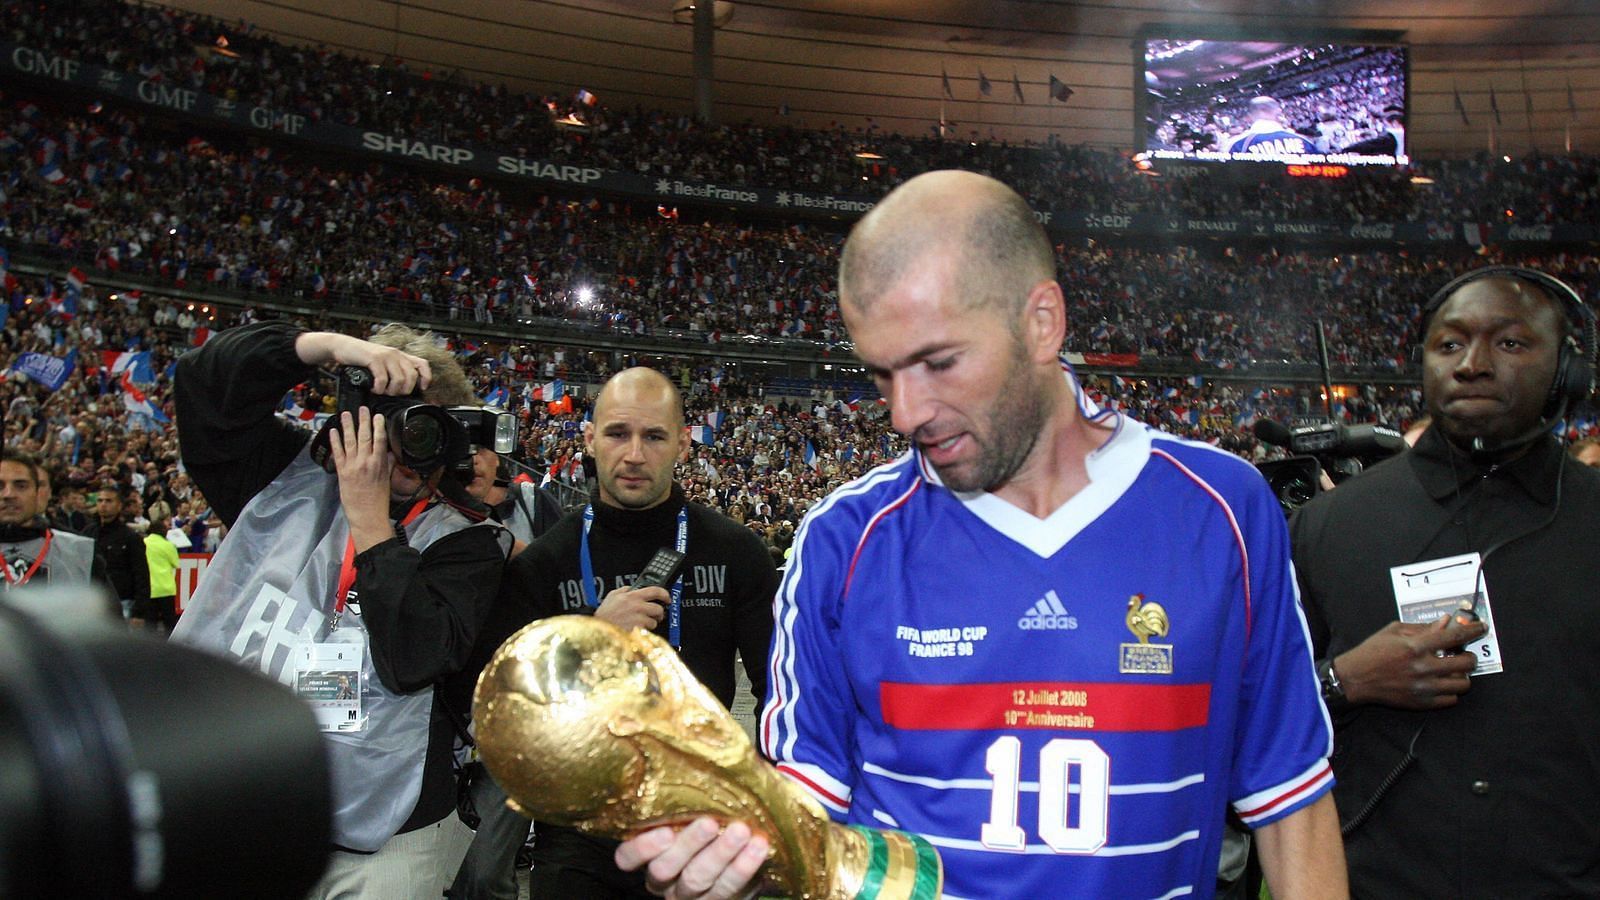 Zinedine Zidane looks at the Jules Rimet trophy in awe after winning the 1998 FIFA World Cup in France.